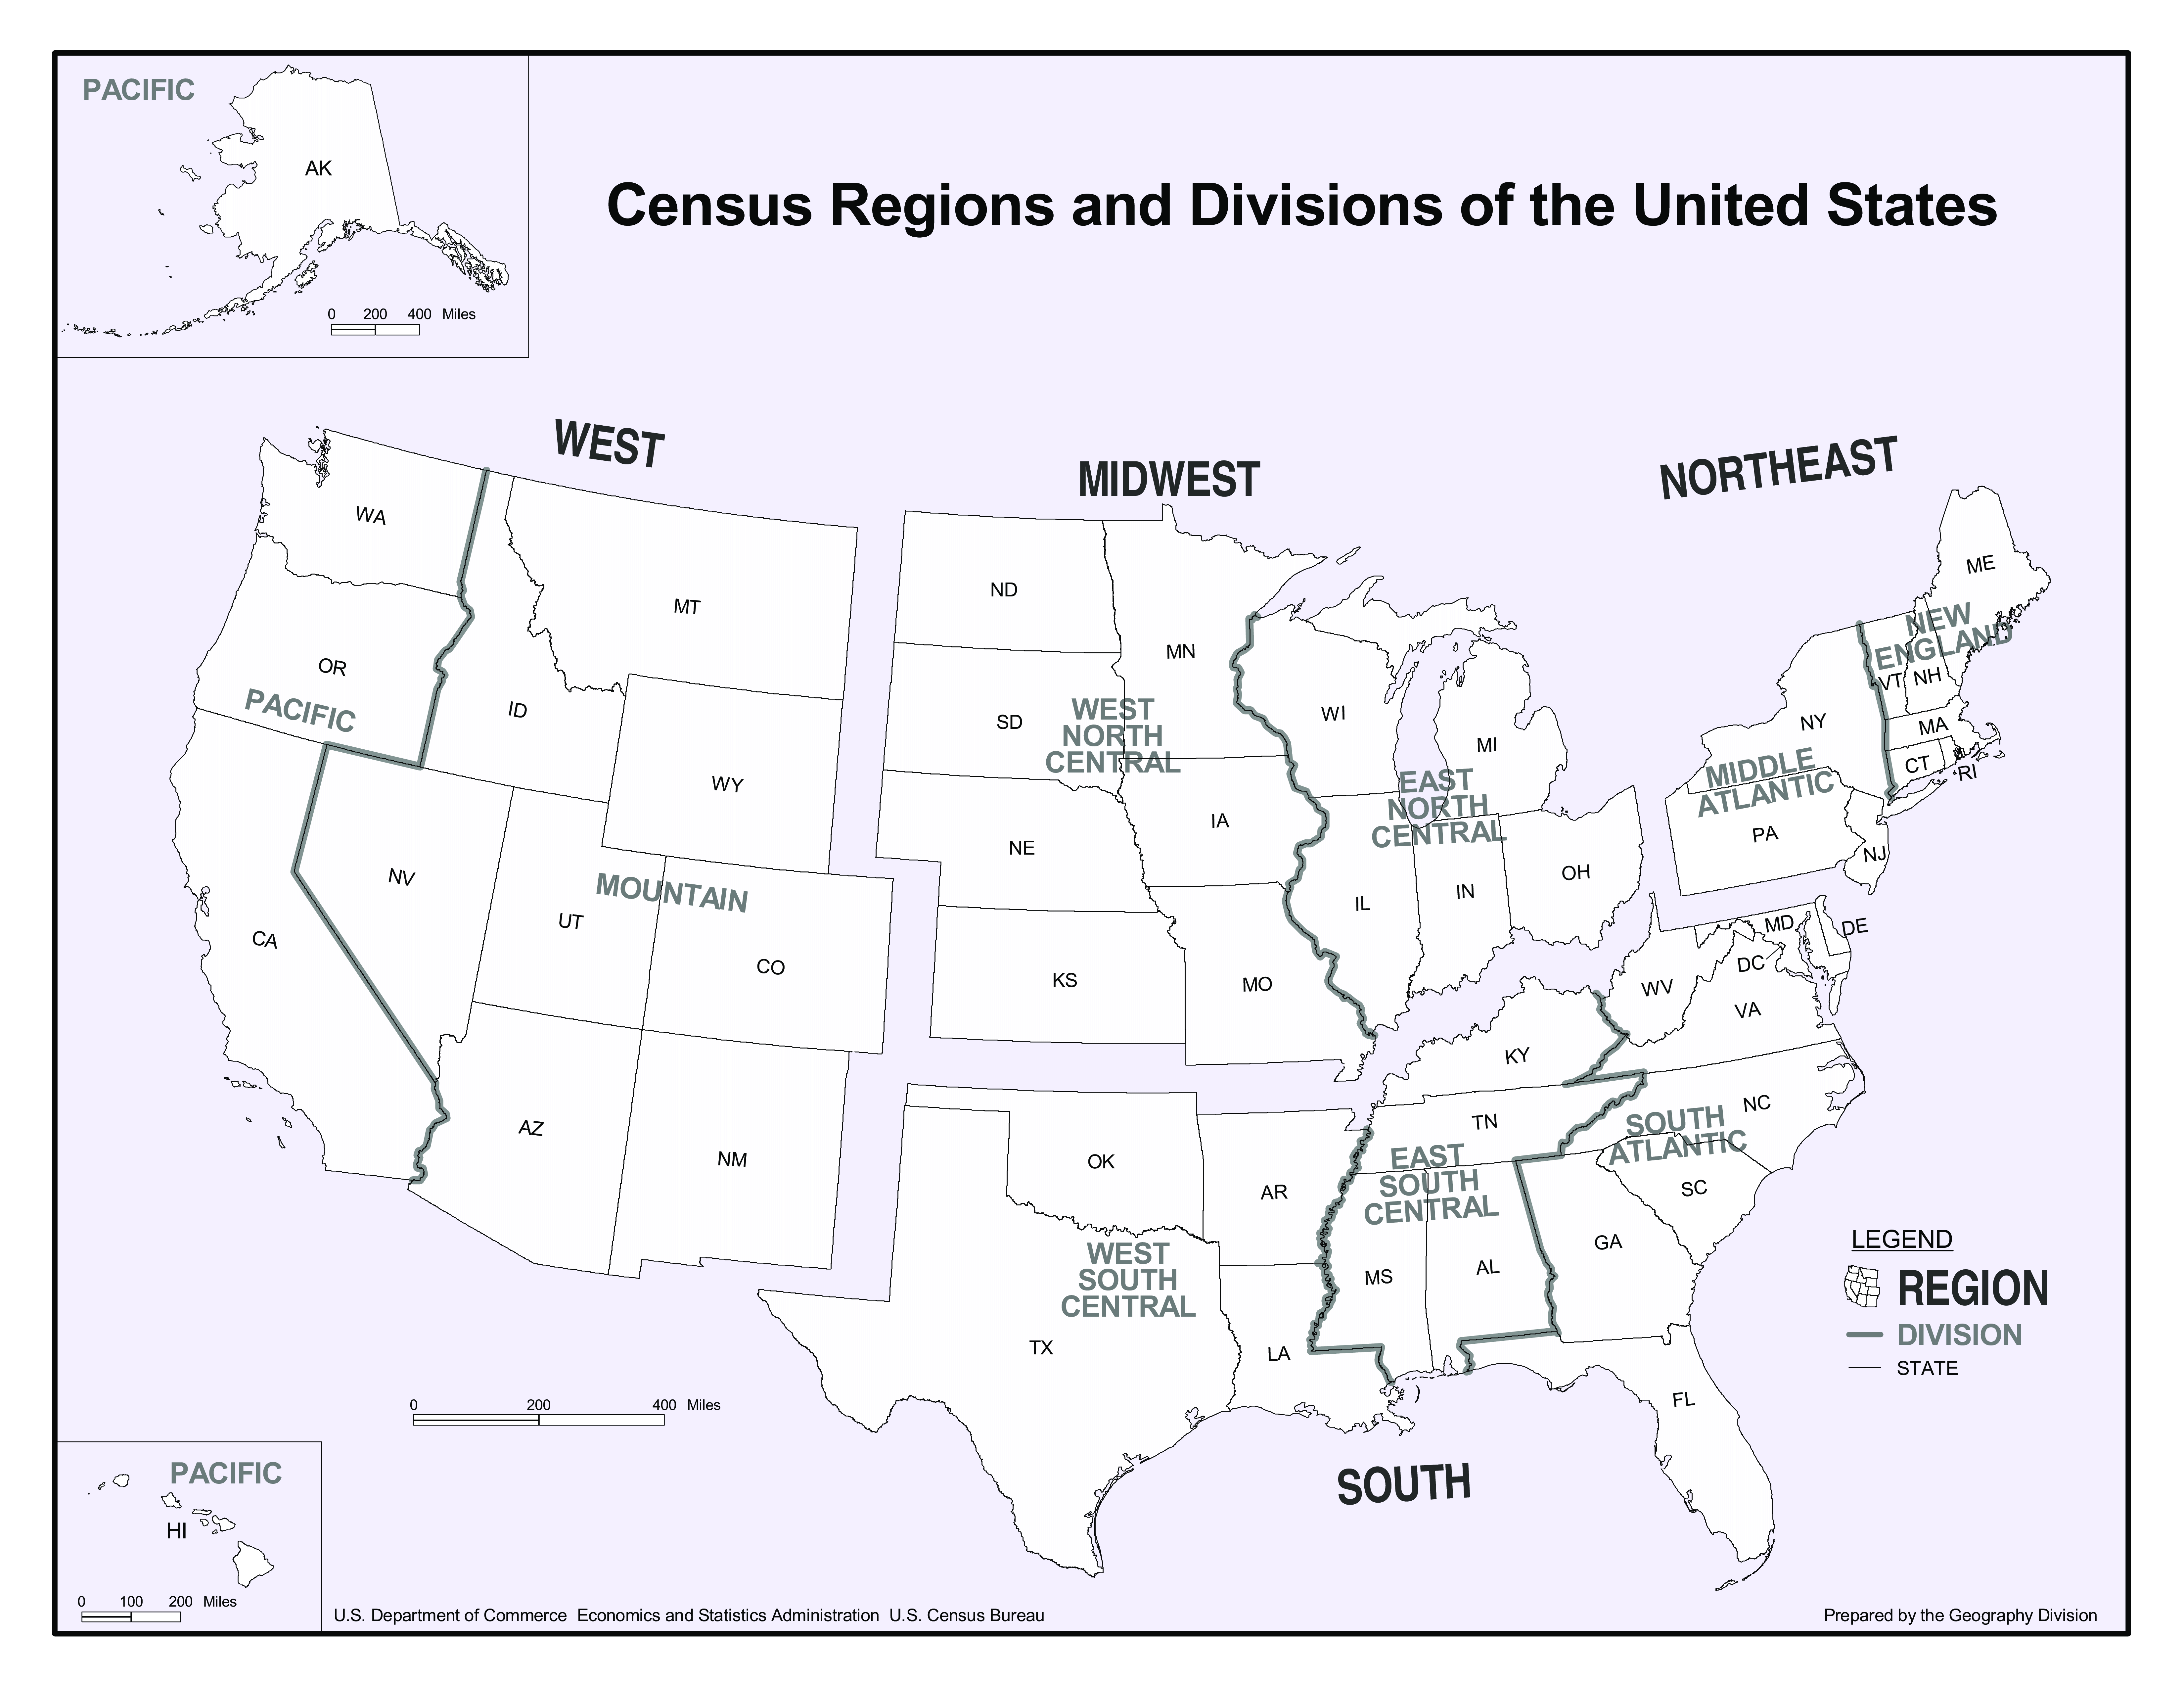 Geographic regions used by the United States Census Bureau.